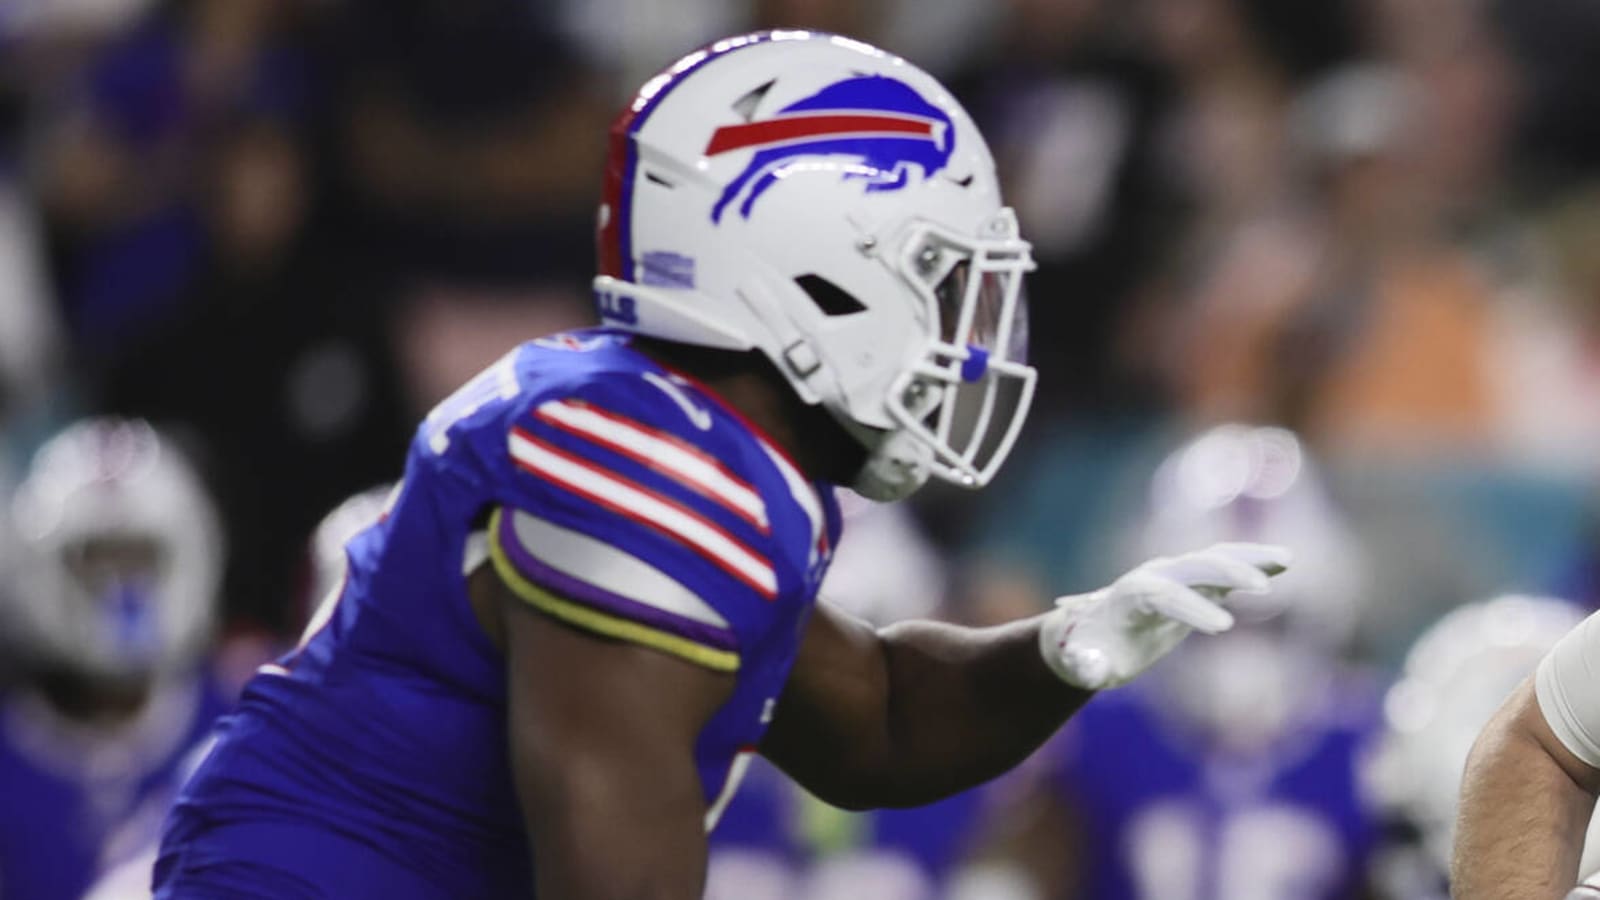  Buffalo Bills Suddenly Release Super Bowl Champion Ahead Of Playoff Matchup with Kansas City Chiefs